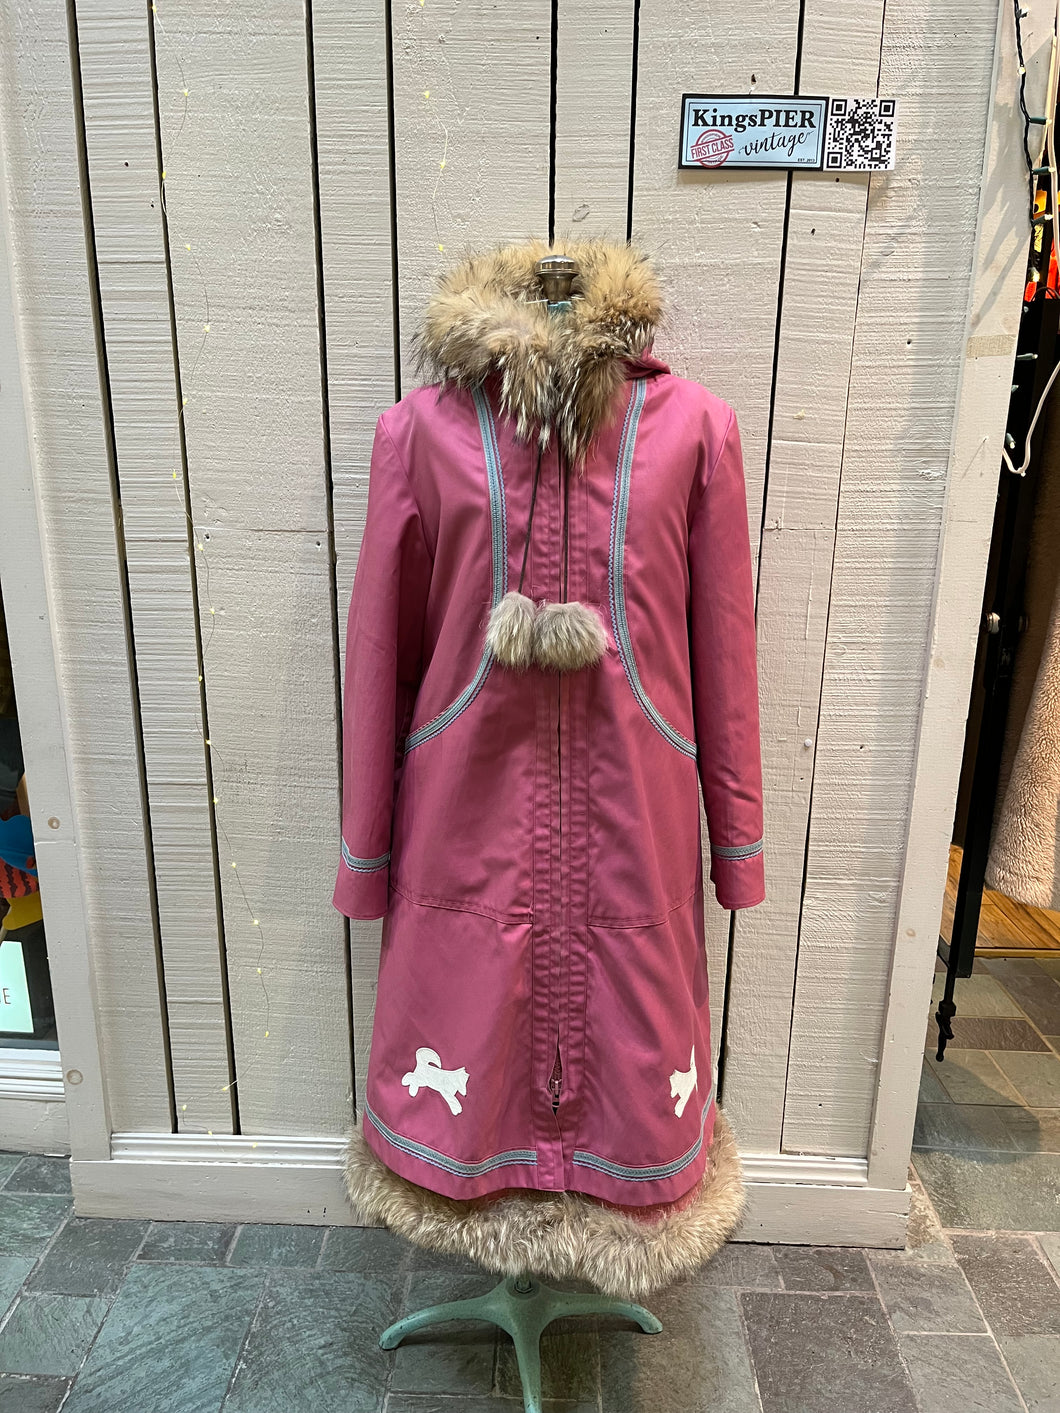 Vintage Yukon Indian Arts and Crafts LTD 100% pure virgin wool northern parka and nylon/ cotton blend removable shell with white leather applique, fur trimmed hood and pom poms, zipper closure, pockets, and hand embroidered flower details.

Made in USA
Size 16